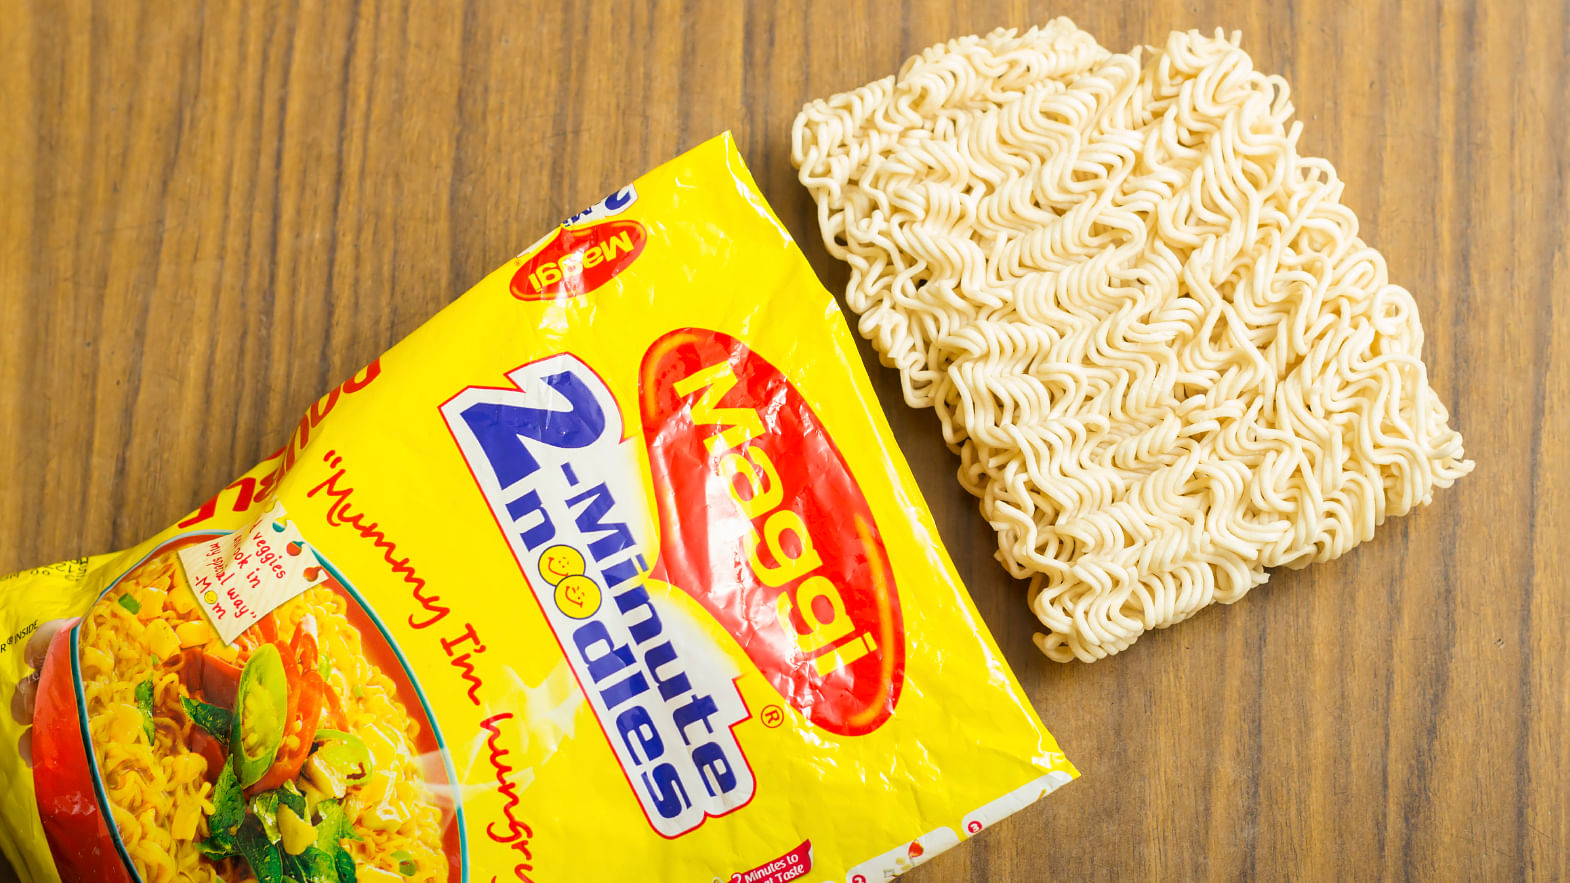 Nestle India today relaunched Maggi noodles in the country, five months after it was banned over the presence of unsafe levels of lead. (Photo: iStock)